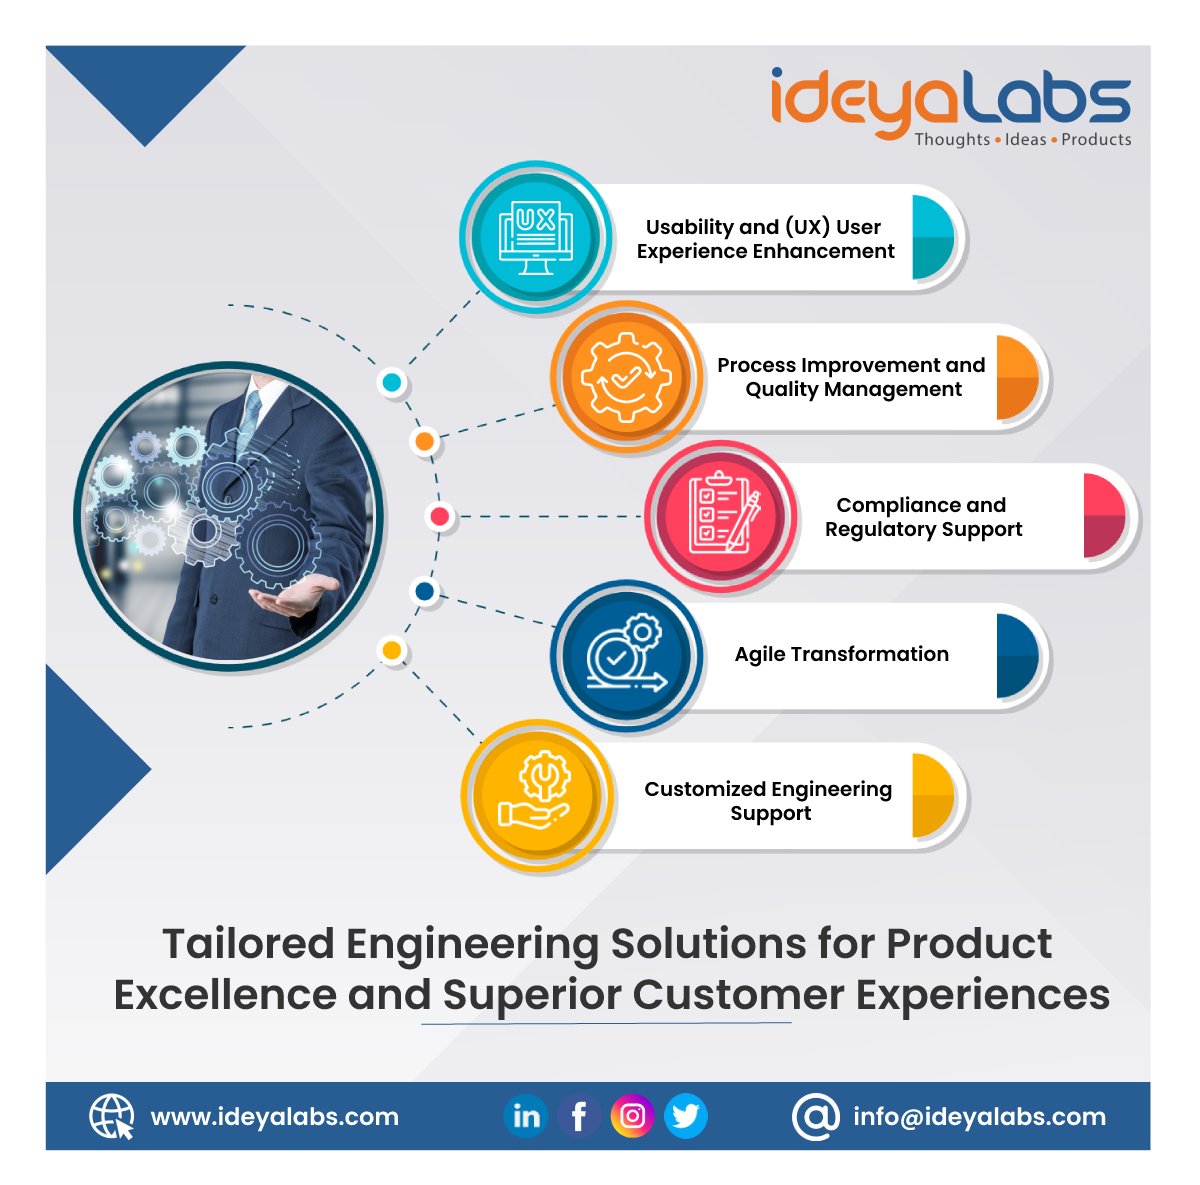 Achieve product excellence with our tailored engineering solutions. 
We enhance usability, optimize processes, ensure compliance, drive agile transformation, and provide customized support.
#ideyaLabs #quality #transformation #engineering #agile